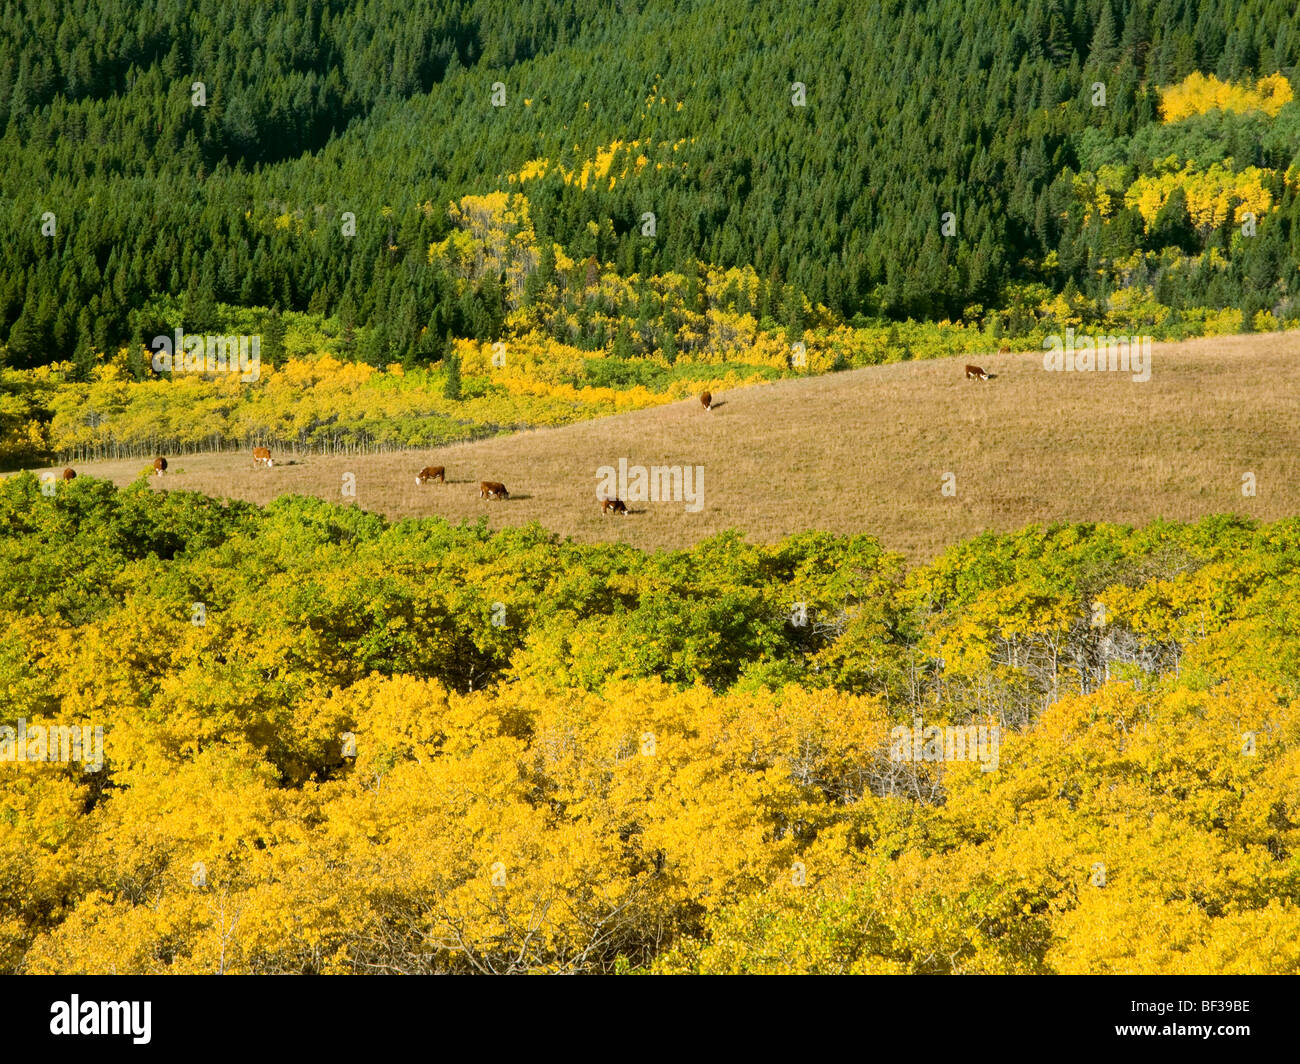 Livestock - Hereford cows grazing on a mountain meadow amidst fall colors / Alberta, Canada. Stock Photo